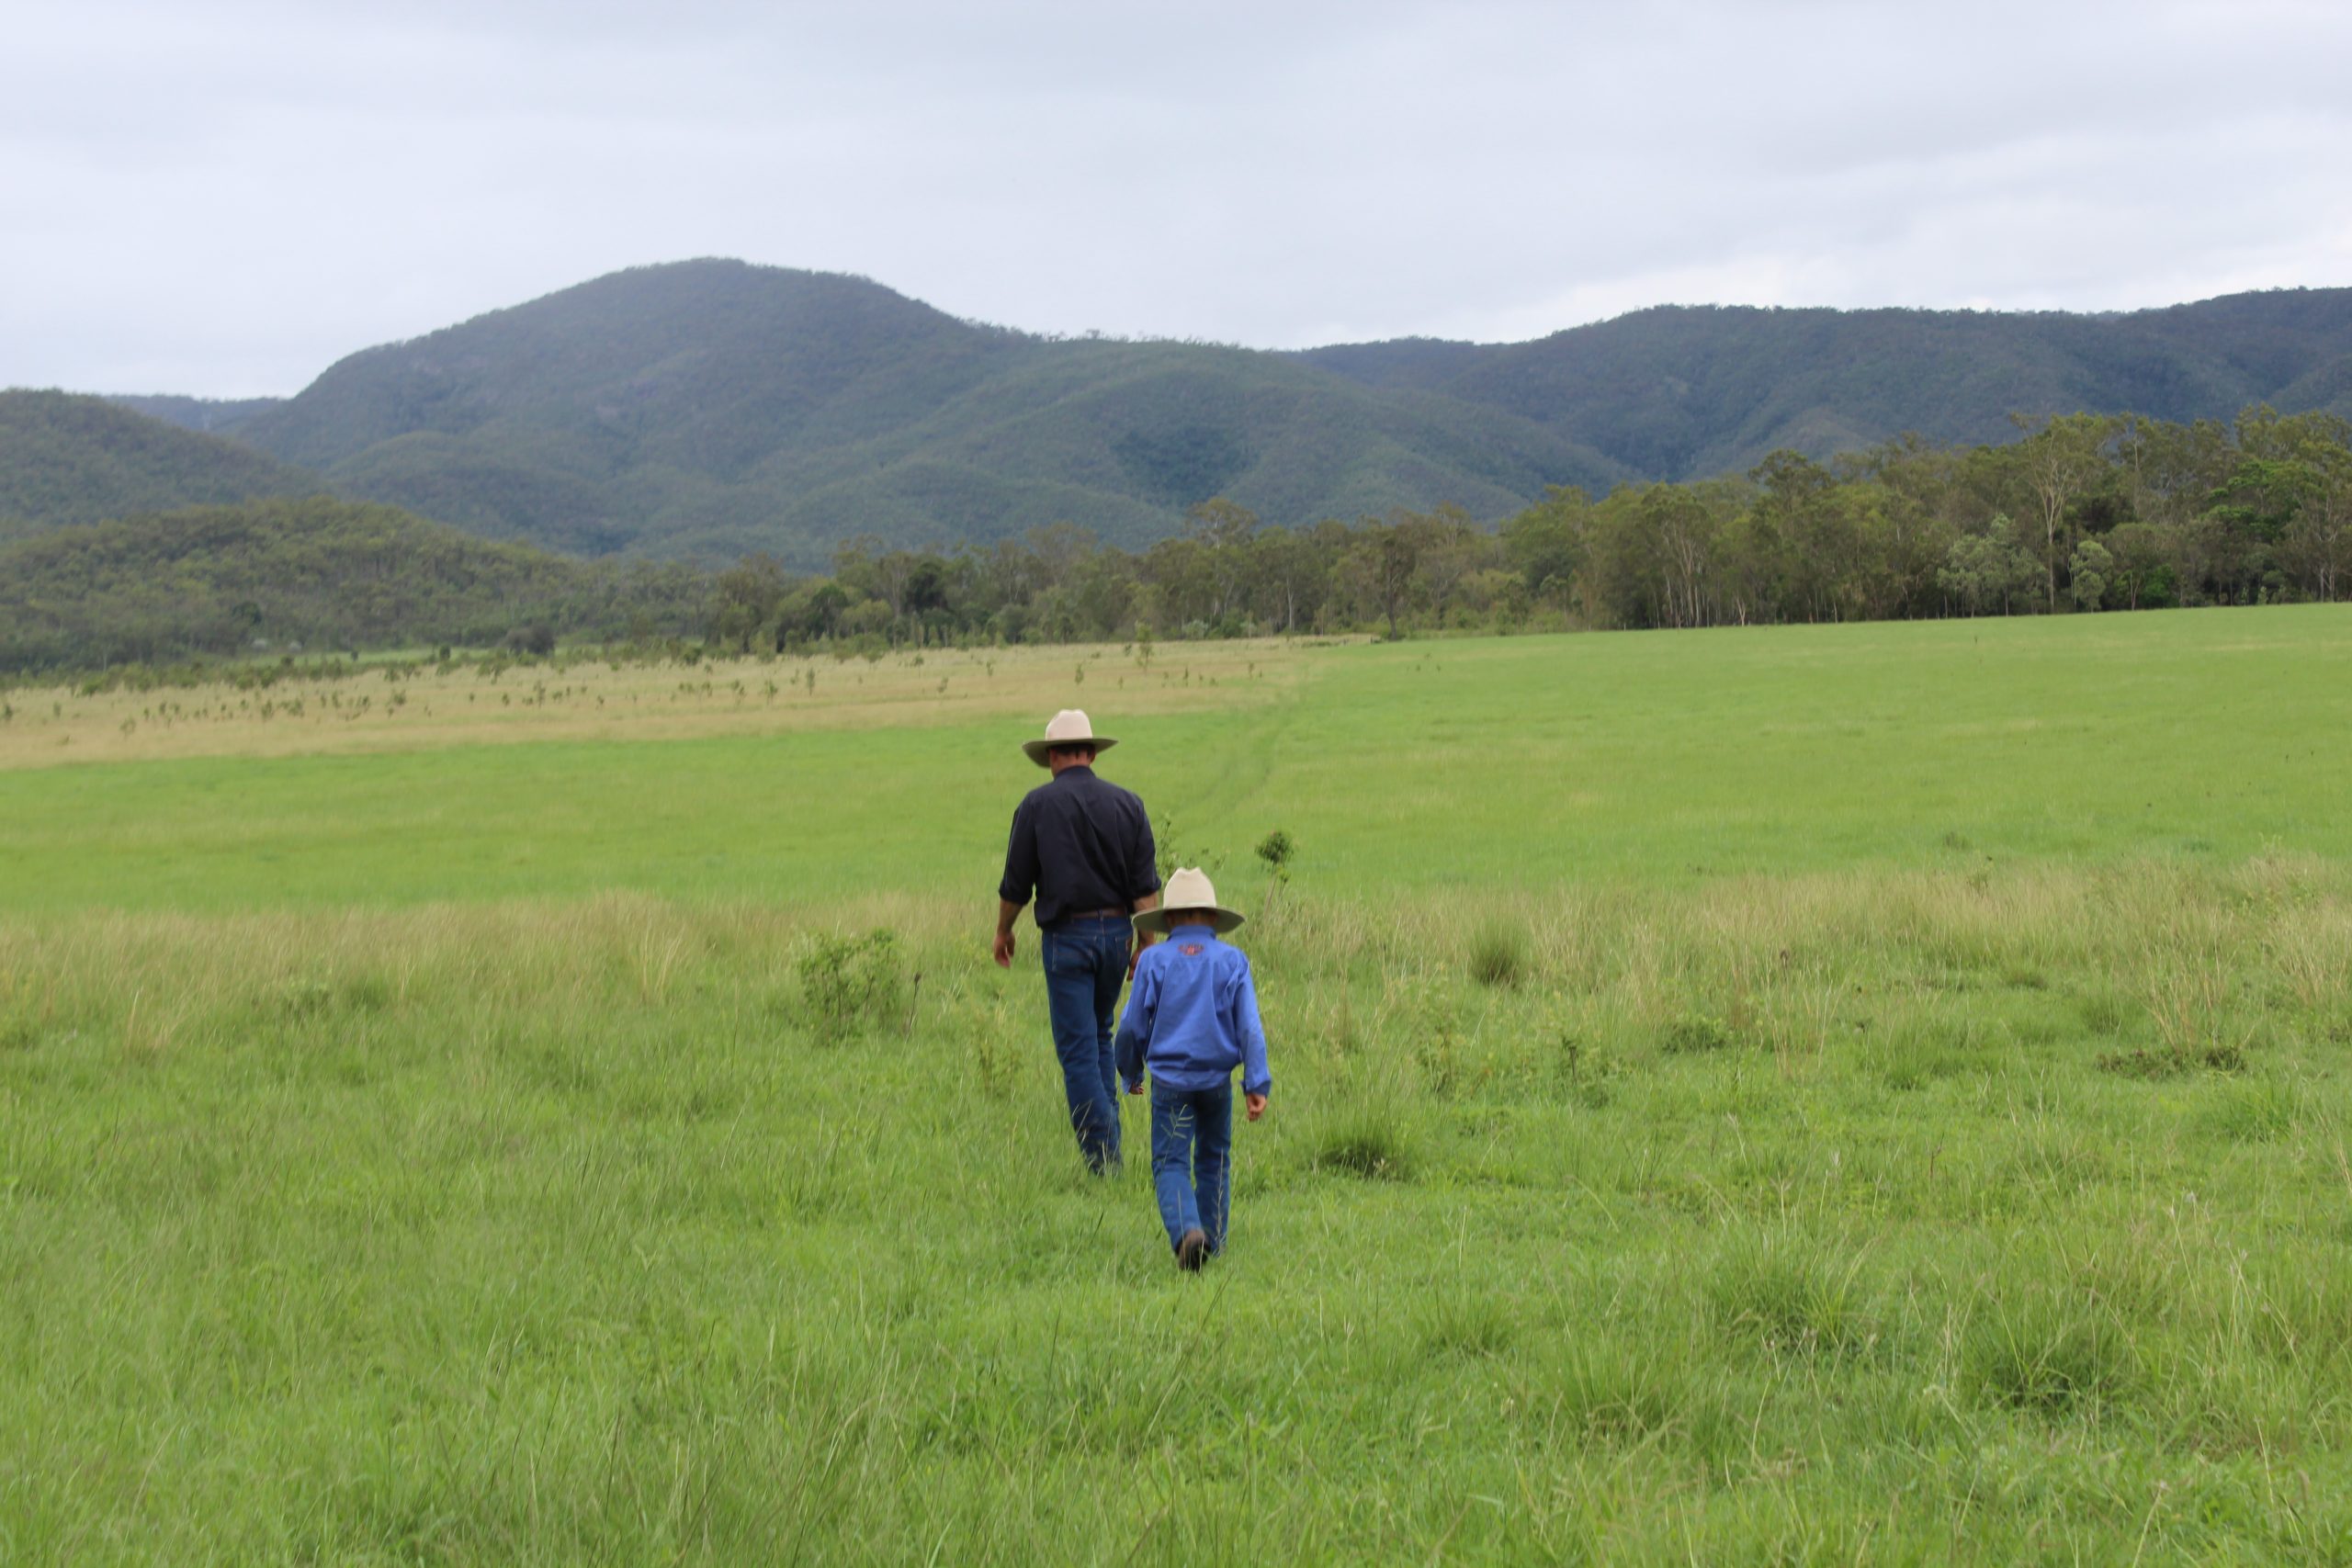 Father and son walking in a paddock towards hills